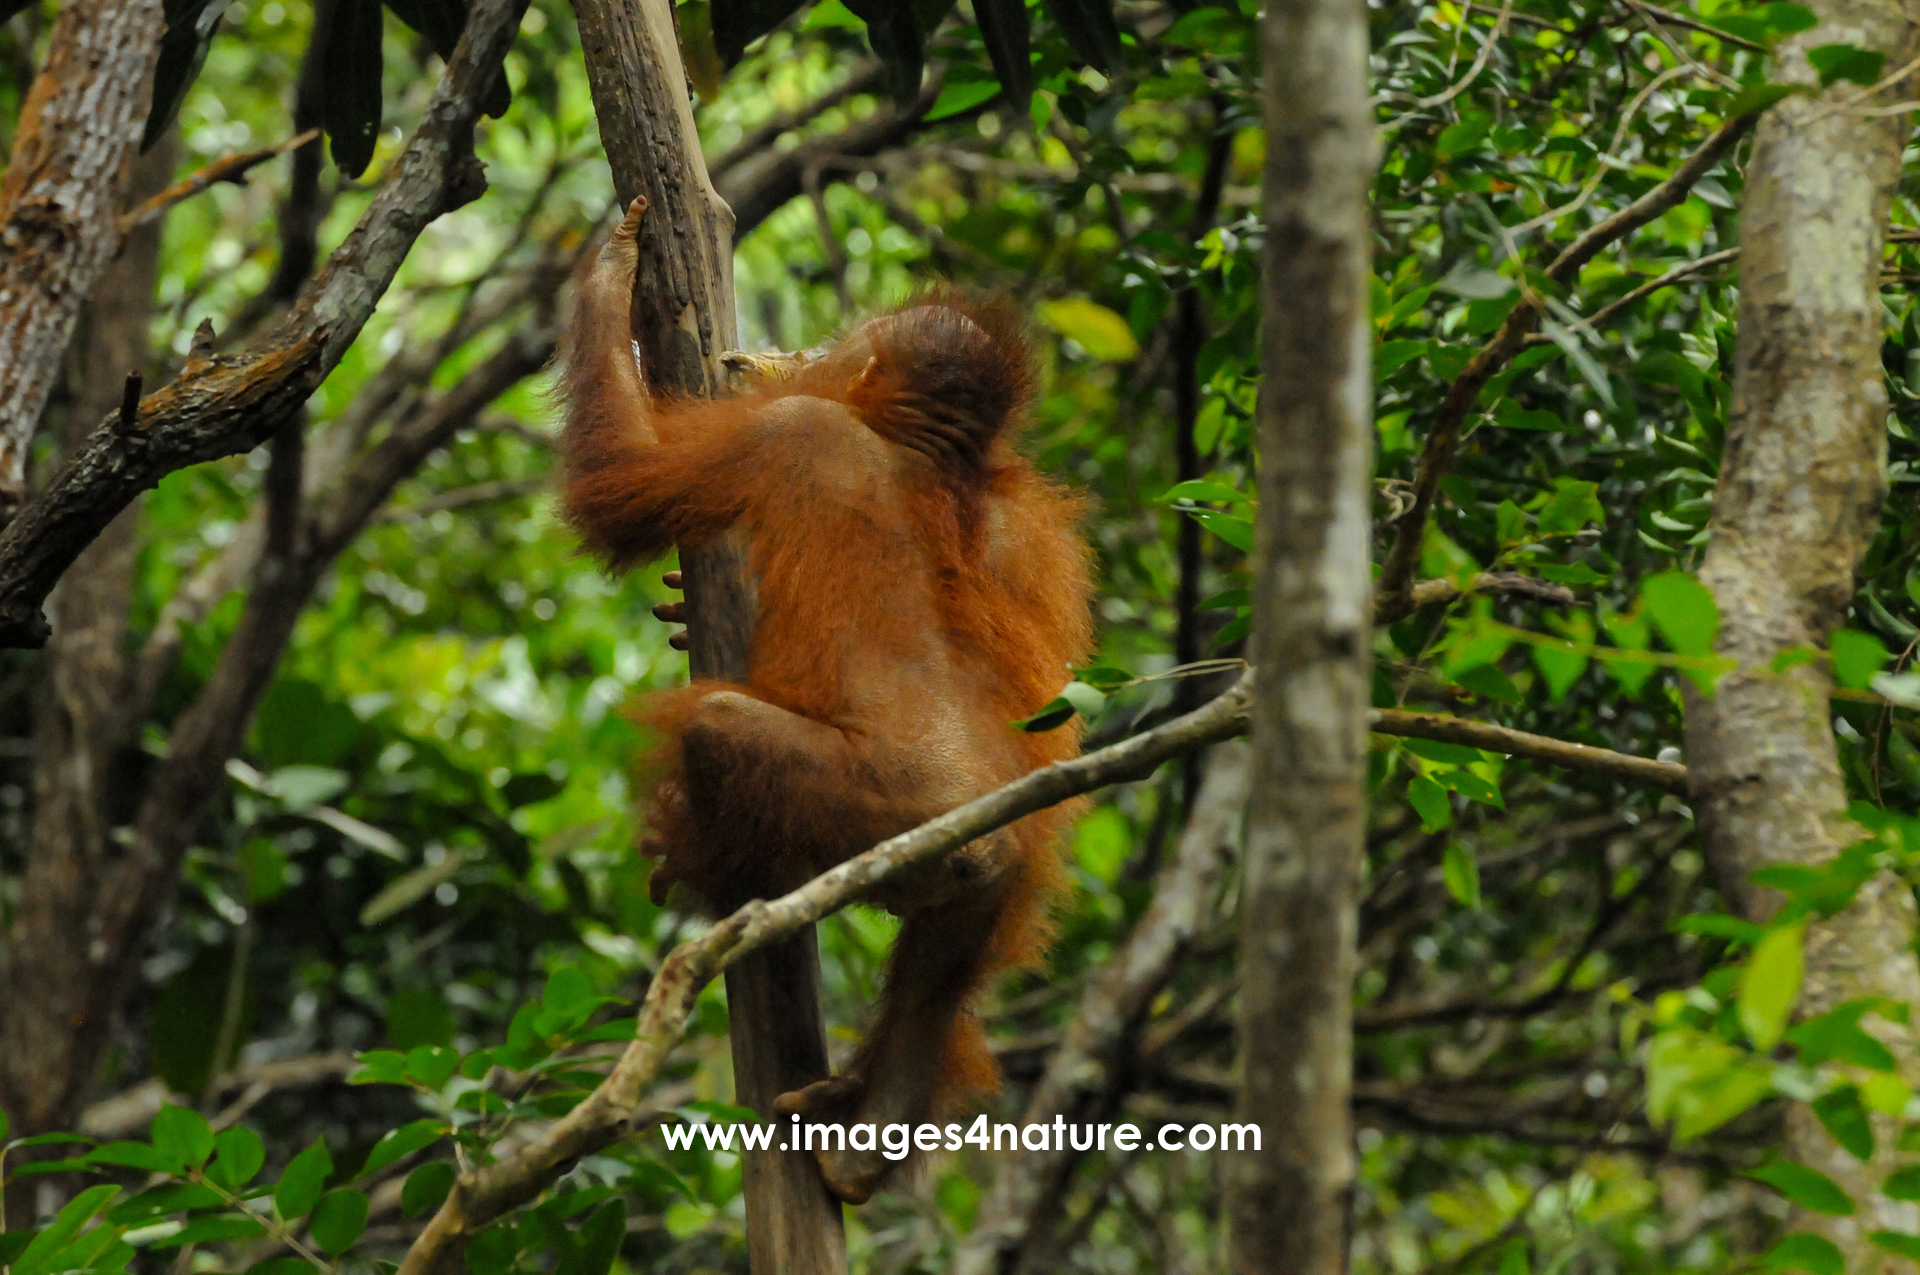 Rear view of orangutan climbing up a tree in tropical forest